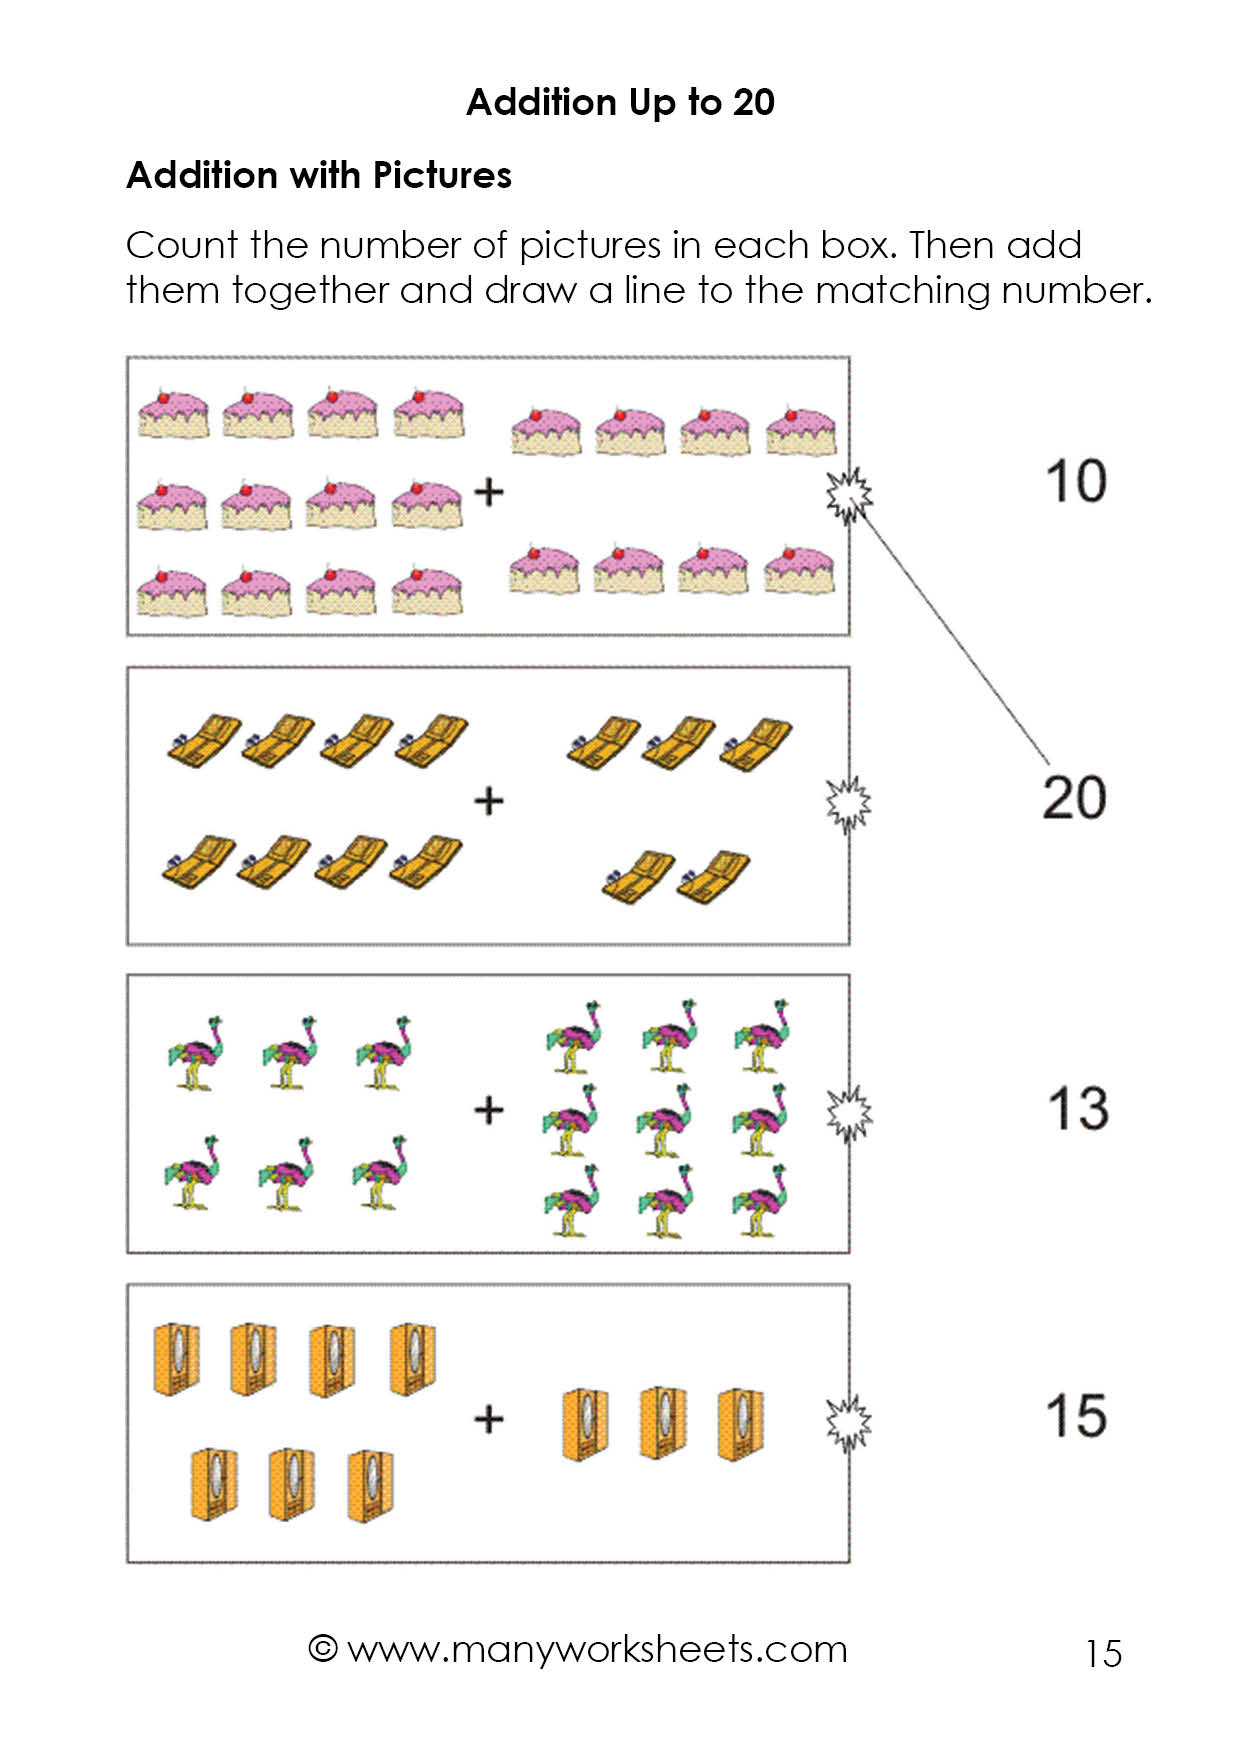 Kindergarten Addition With Sum Up To 20 Worksheets